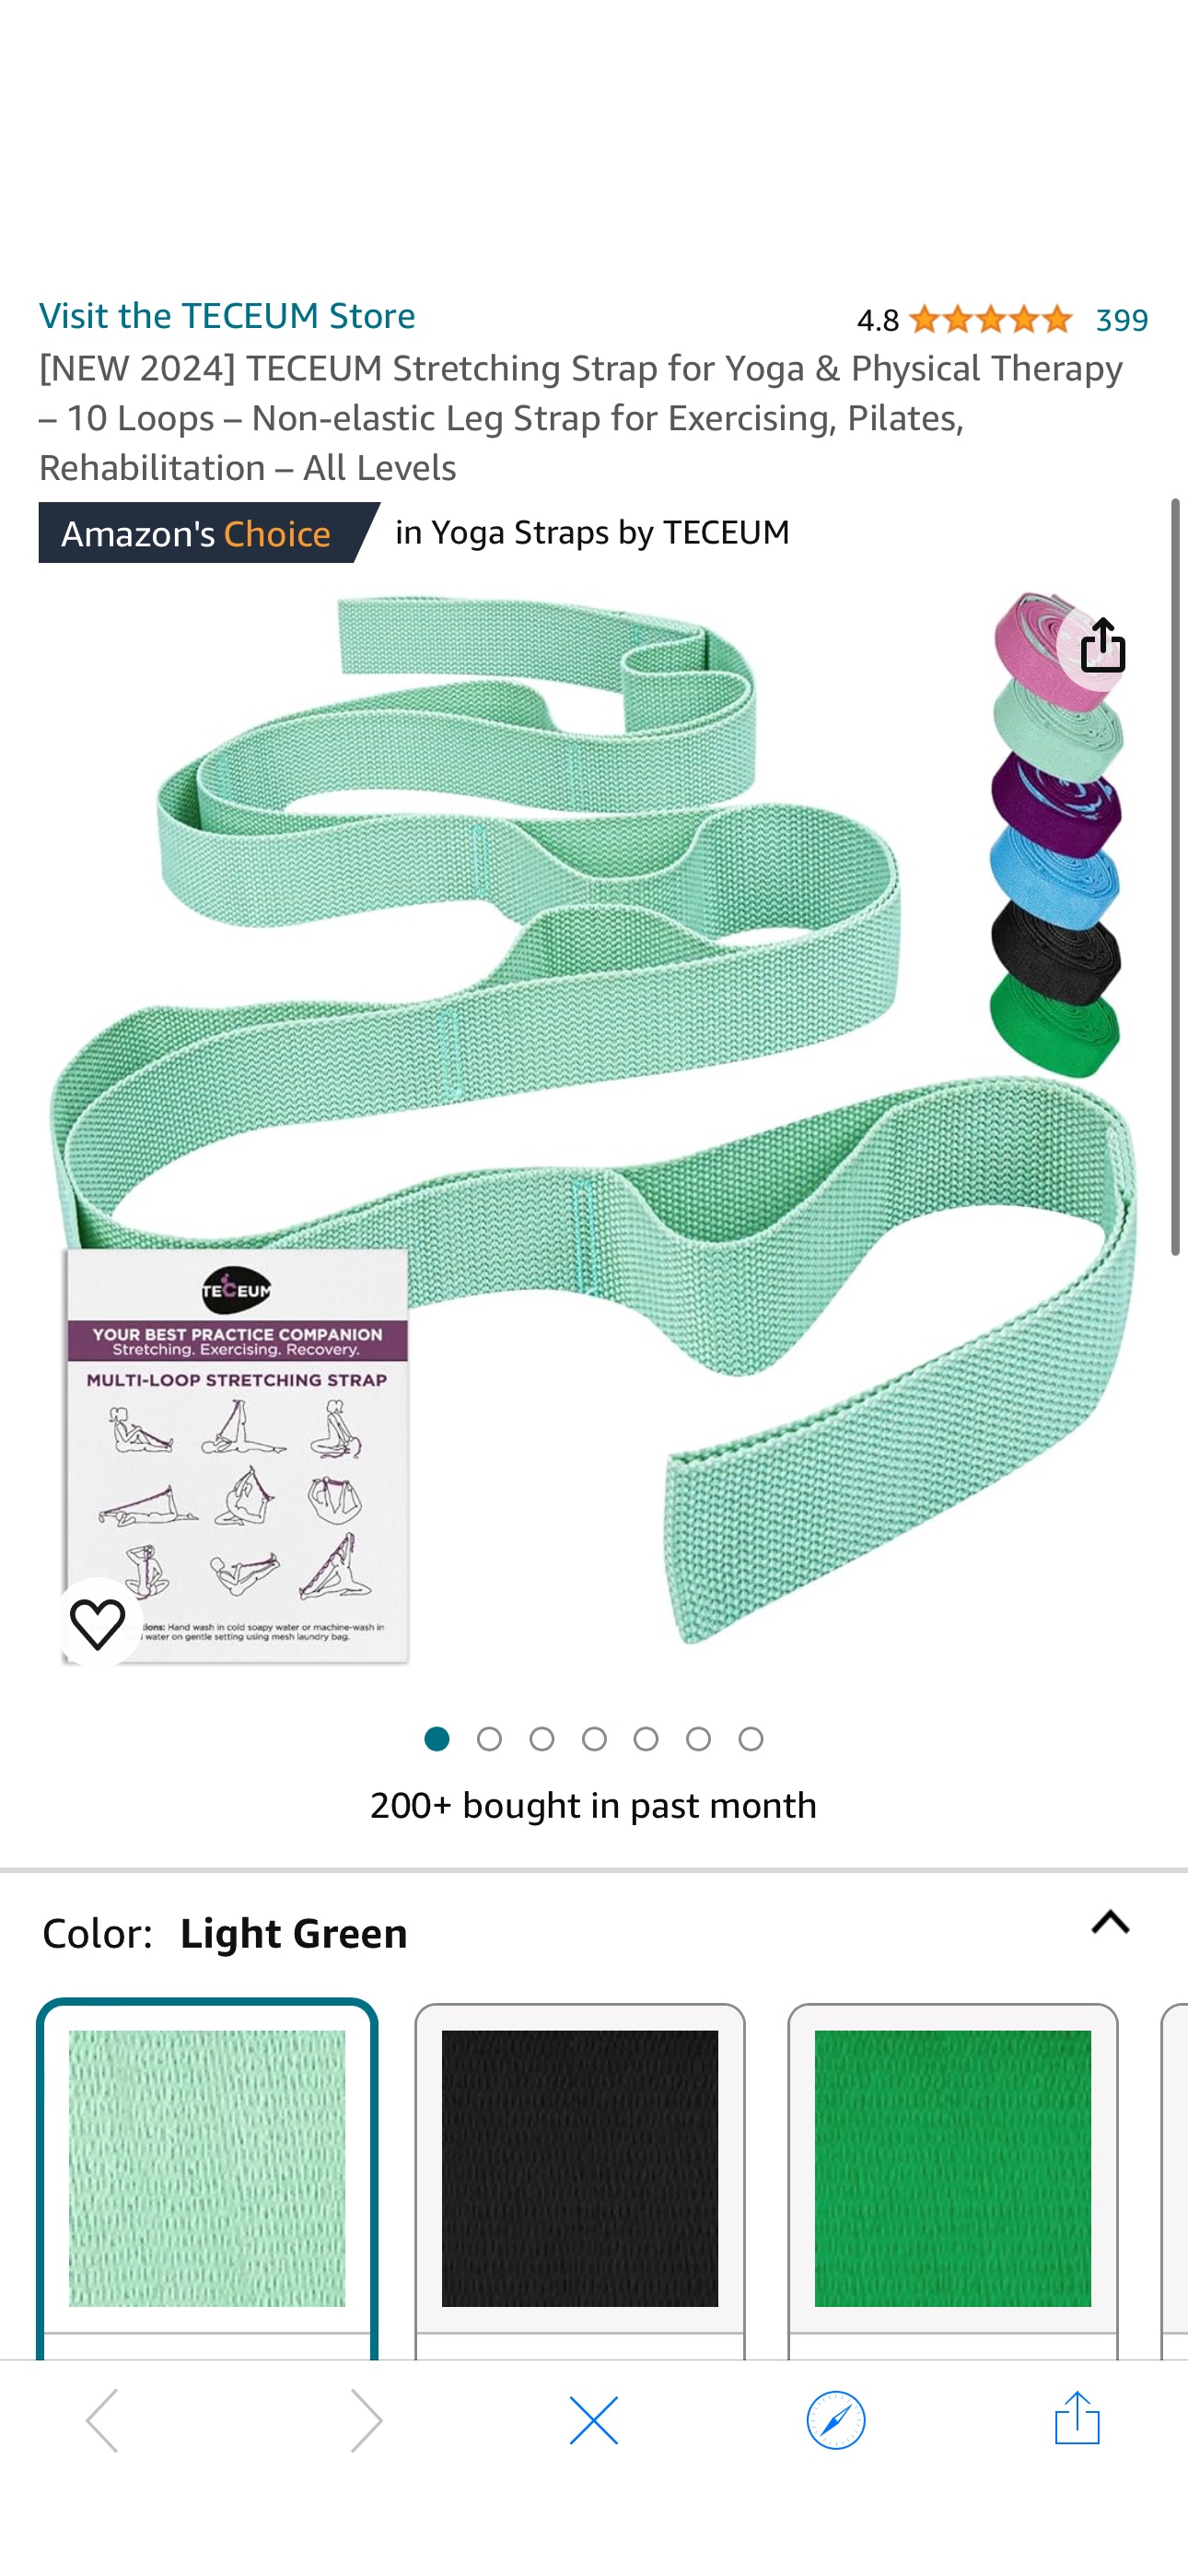 Amazon.com : [NEW 2023] TECEUM Stretching Strap for Yoga & Physical Therapy – 10 Loops – Choice of materials & colors – Non-elastic Leg Stretch Out Straps for Stretching, Exercising, Pilates, Post-inj